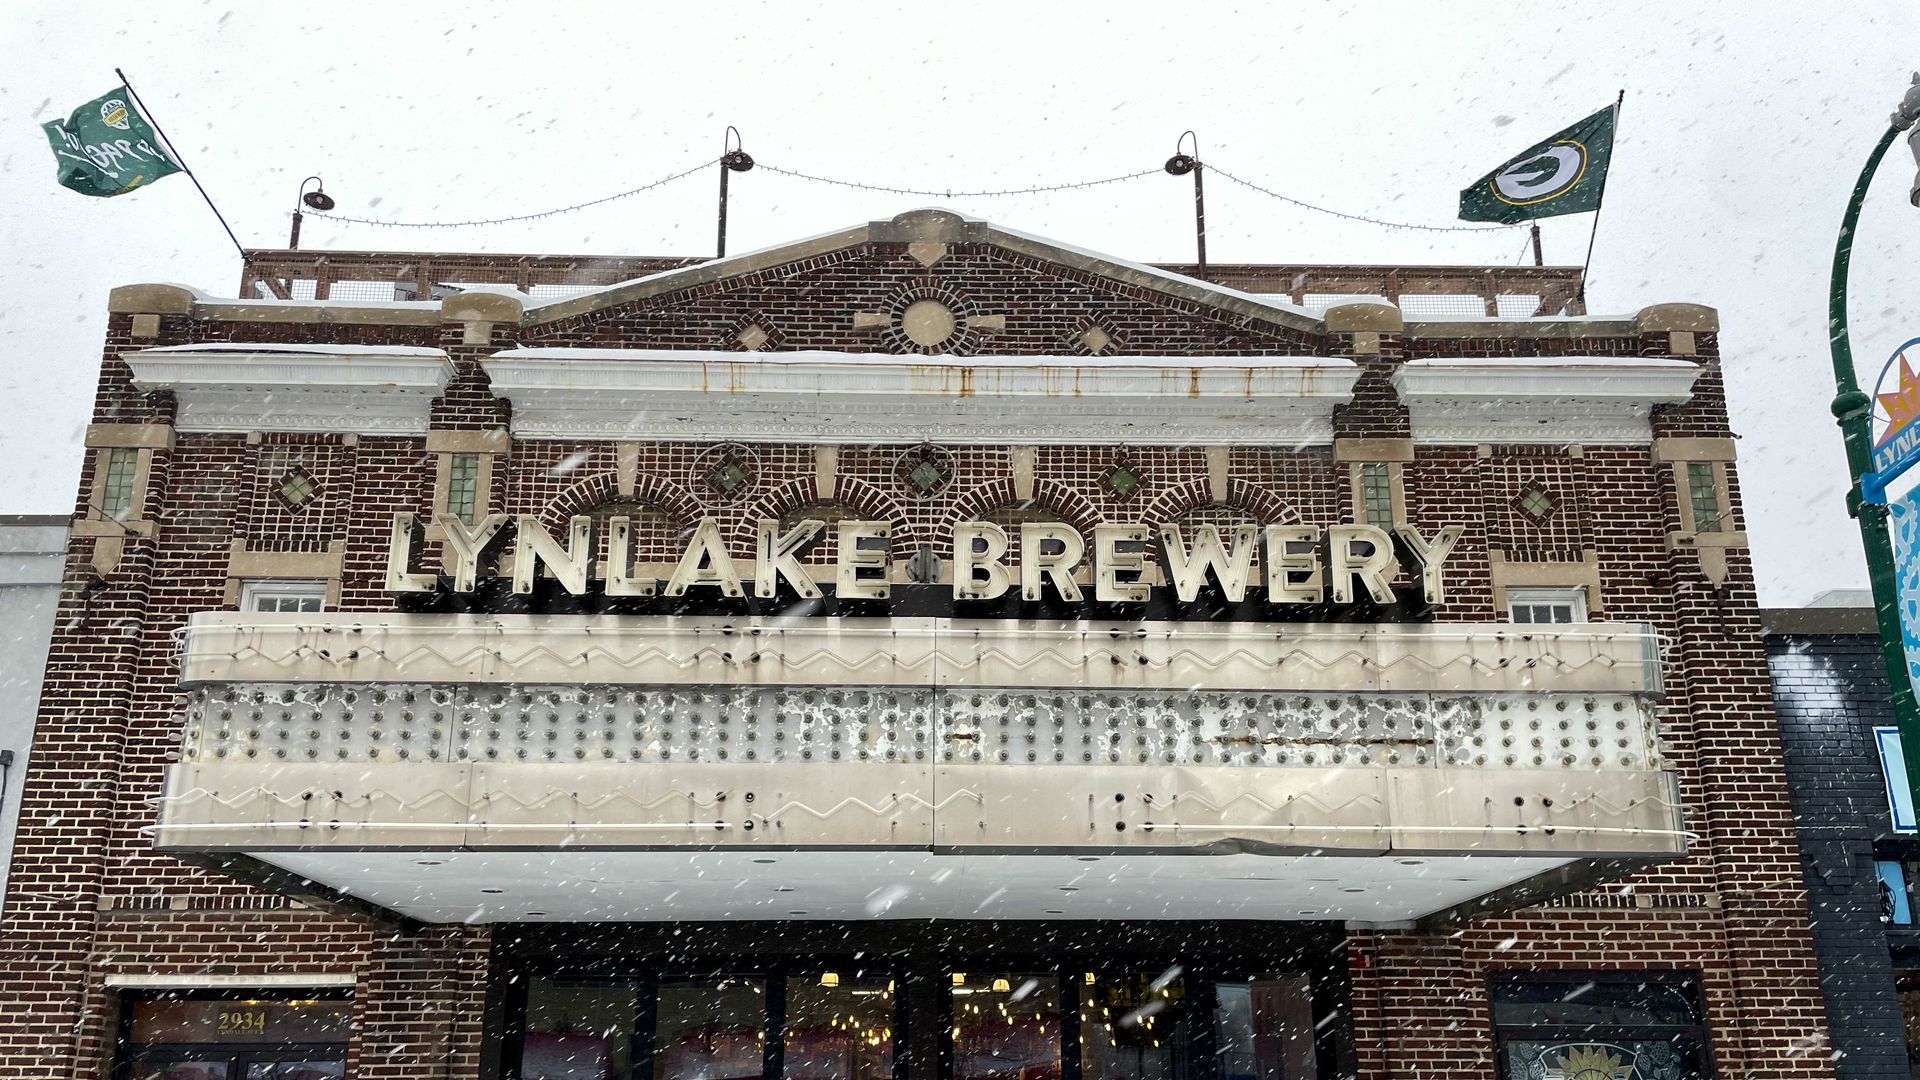 The exterior of LynLake Brewery, a brown brick building, as seen on a snowy day.